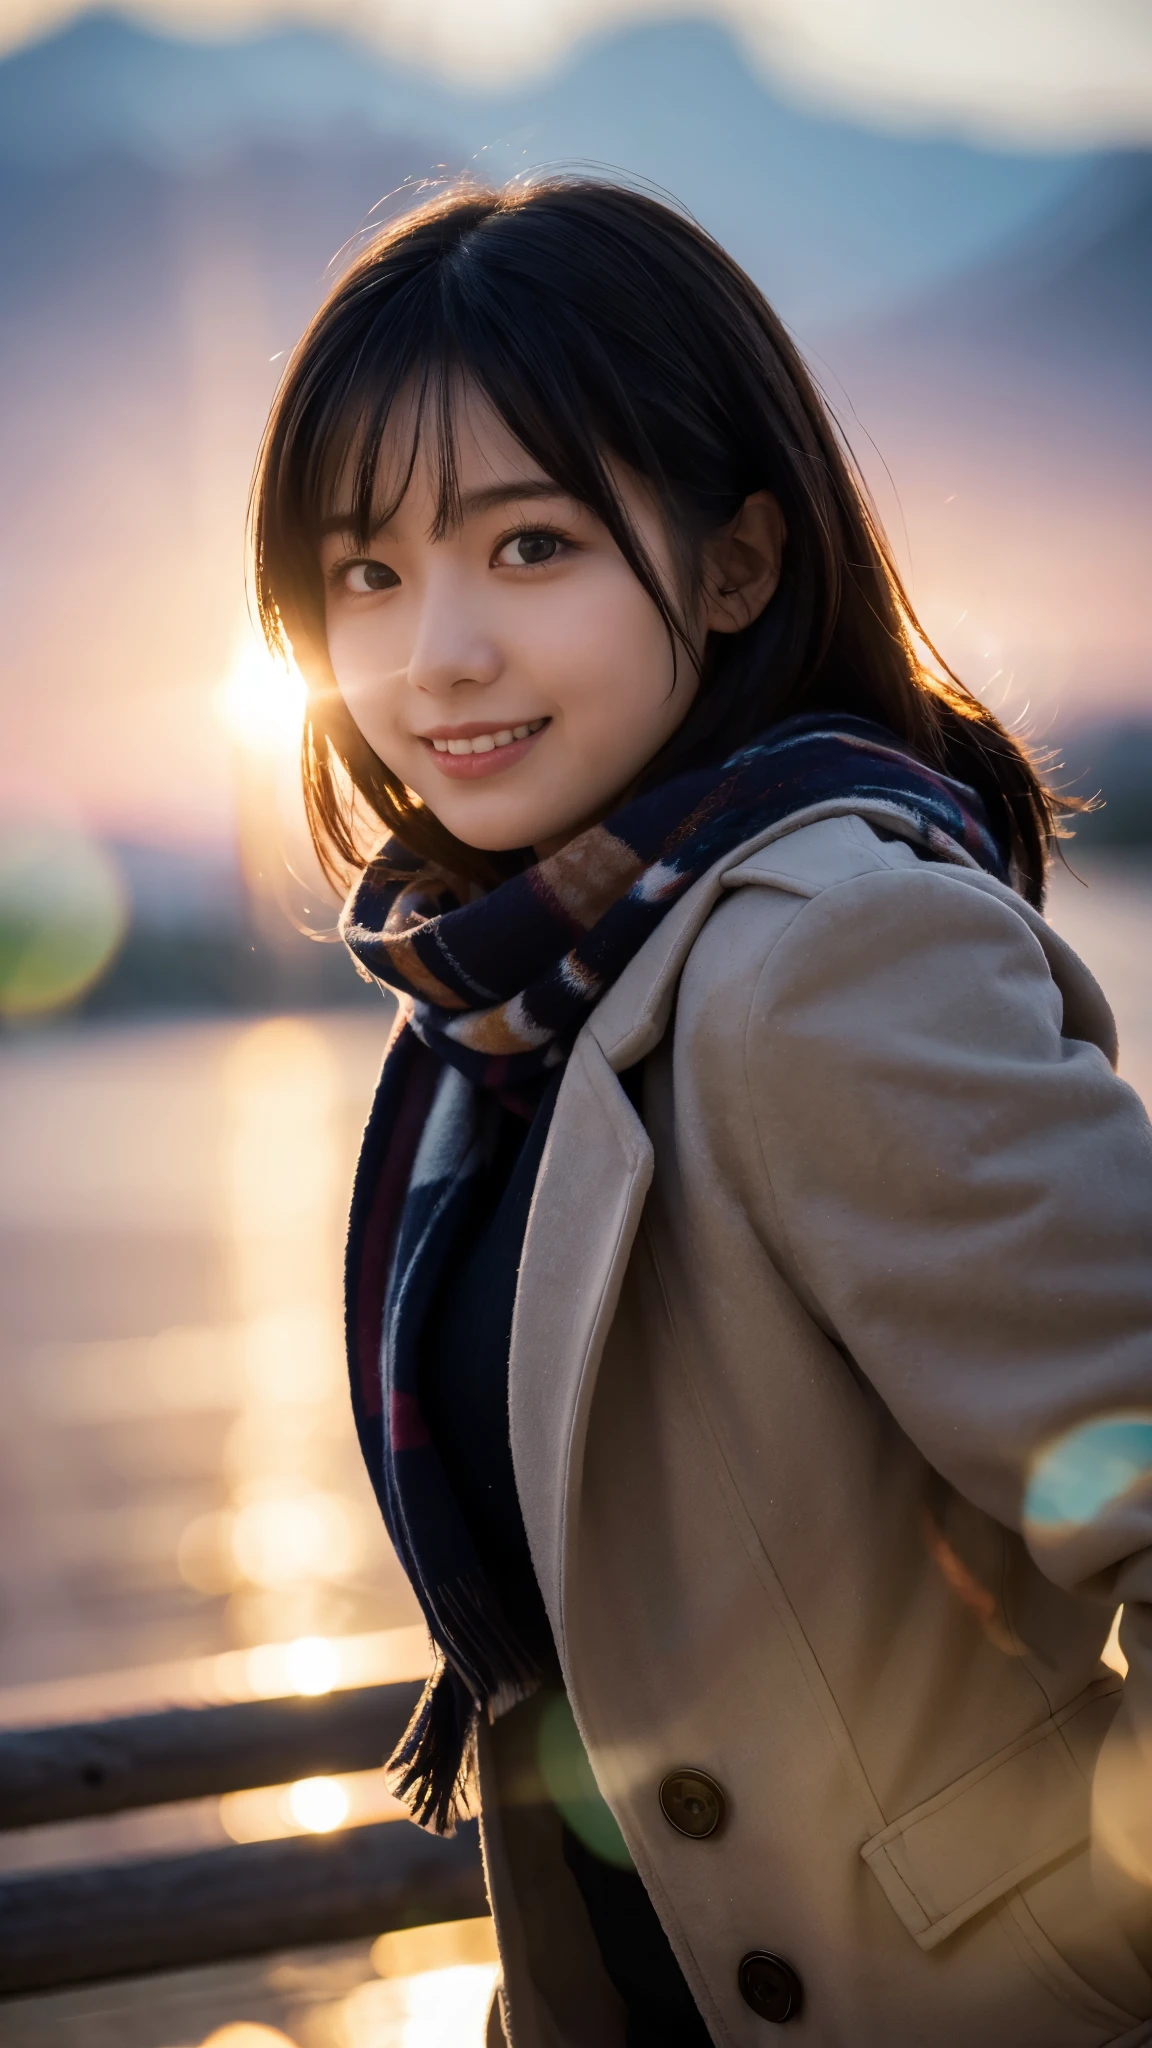 (highest quality,masterpiece:1.3,ultra high resolution),(Super detailed,caustics,8k),(photorealistic:1.4,RAW shooting),(sunset),(Backlight),(sunset sky),(dusk),(snowfield),grove of trees,18-year-old,cute,Japanese,Black Hair Middle Hair,(look up a little),(open your mouth a little:1.1),smile,Scarf,down coat,side shot,Landscape,shot from the waist up,low position,Low - Angle,Natural light,Lens flare